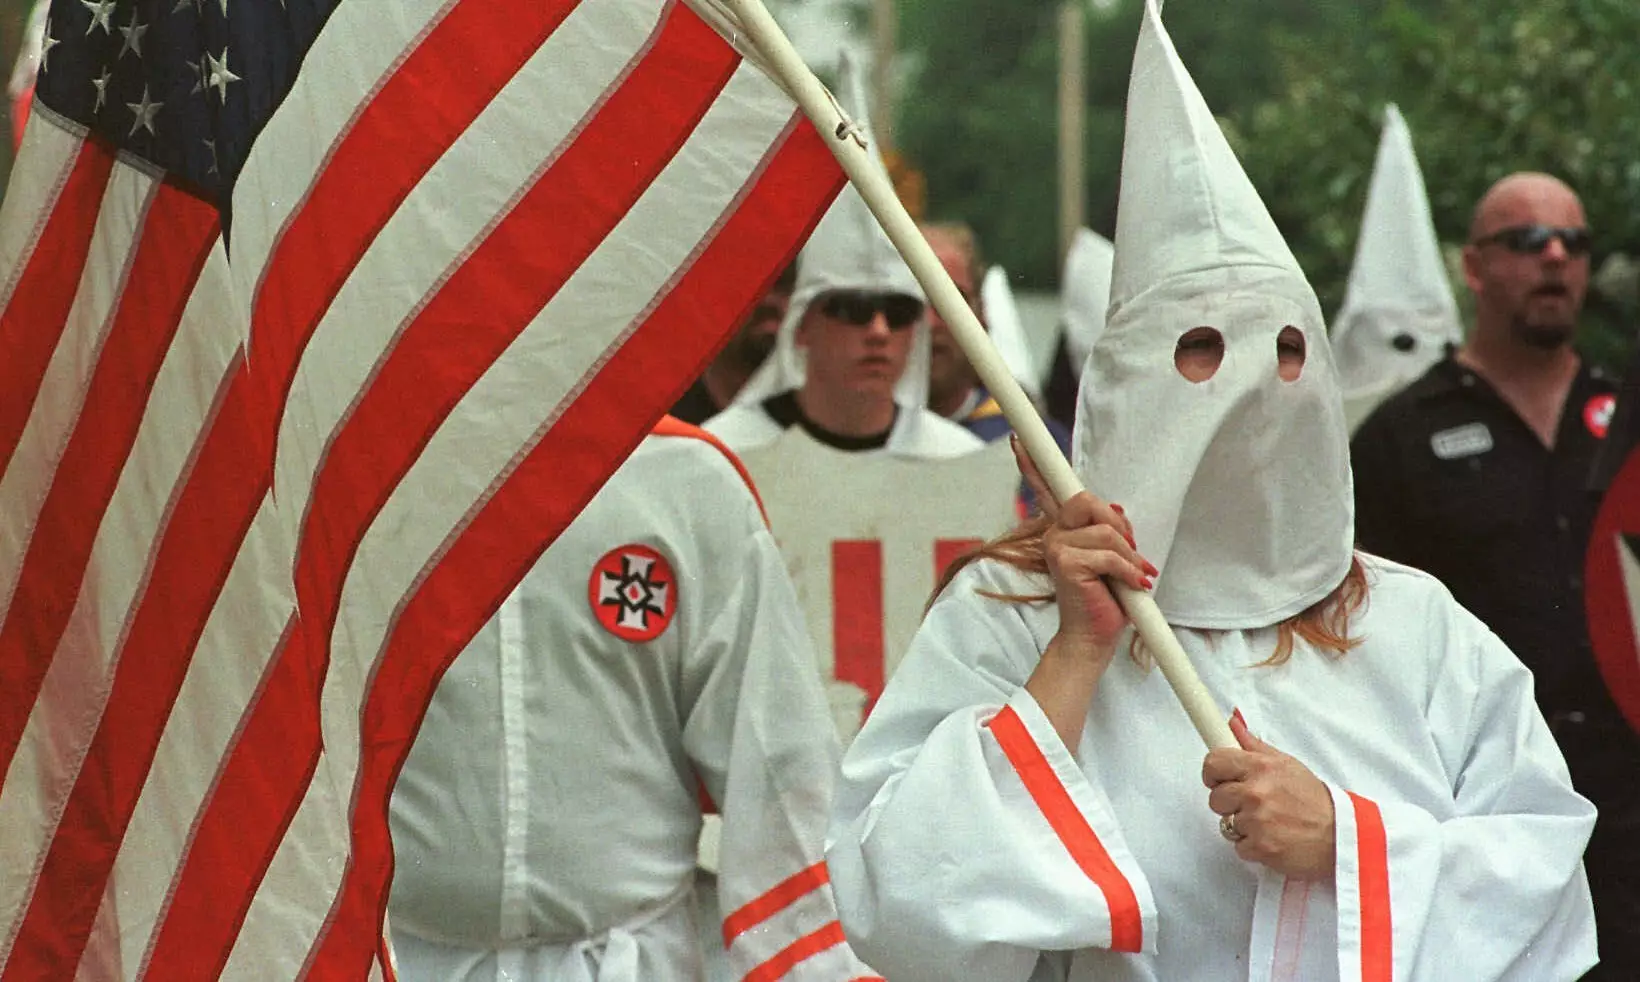 Did The KKK’s Support Really Help Donald Trump Win The Top Seat?